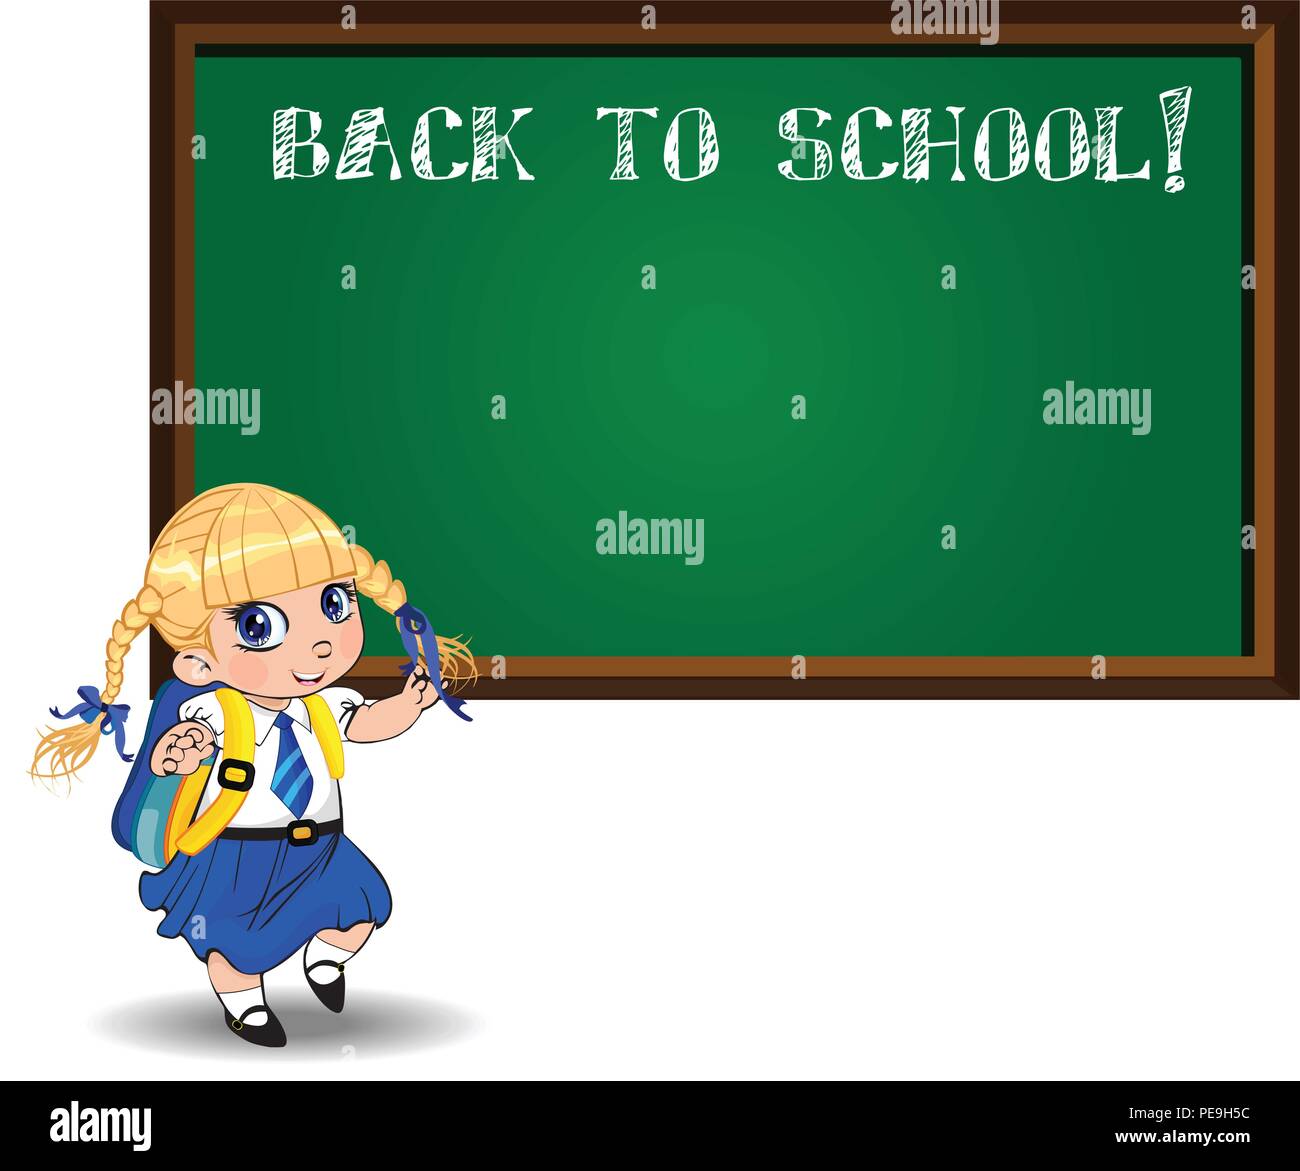 Cute Little Blonde School Girl With Braids And Big Blue Eyes Wearing Uniform With Backpack 